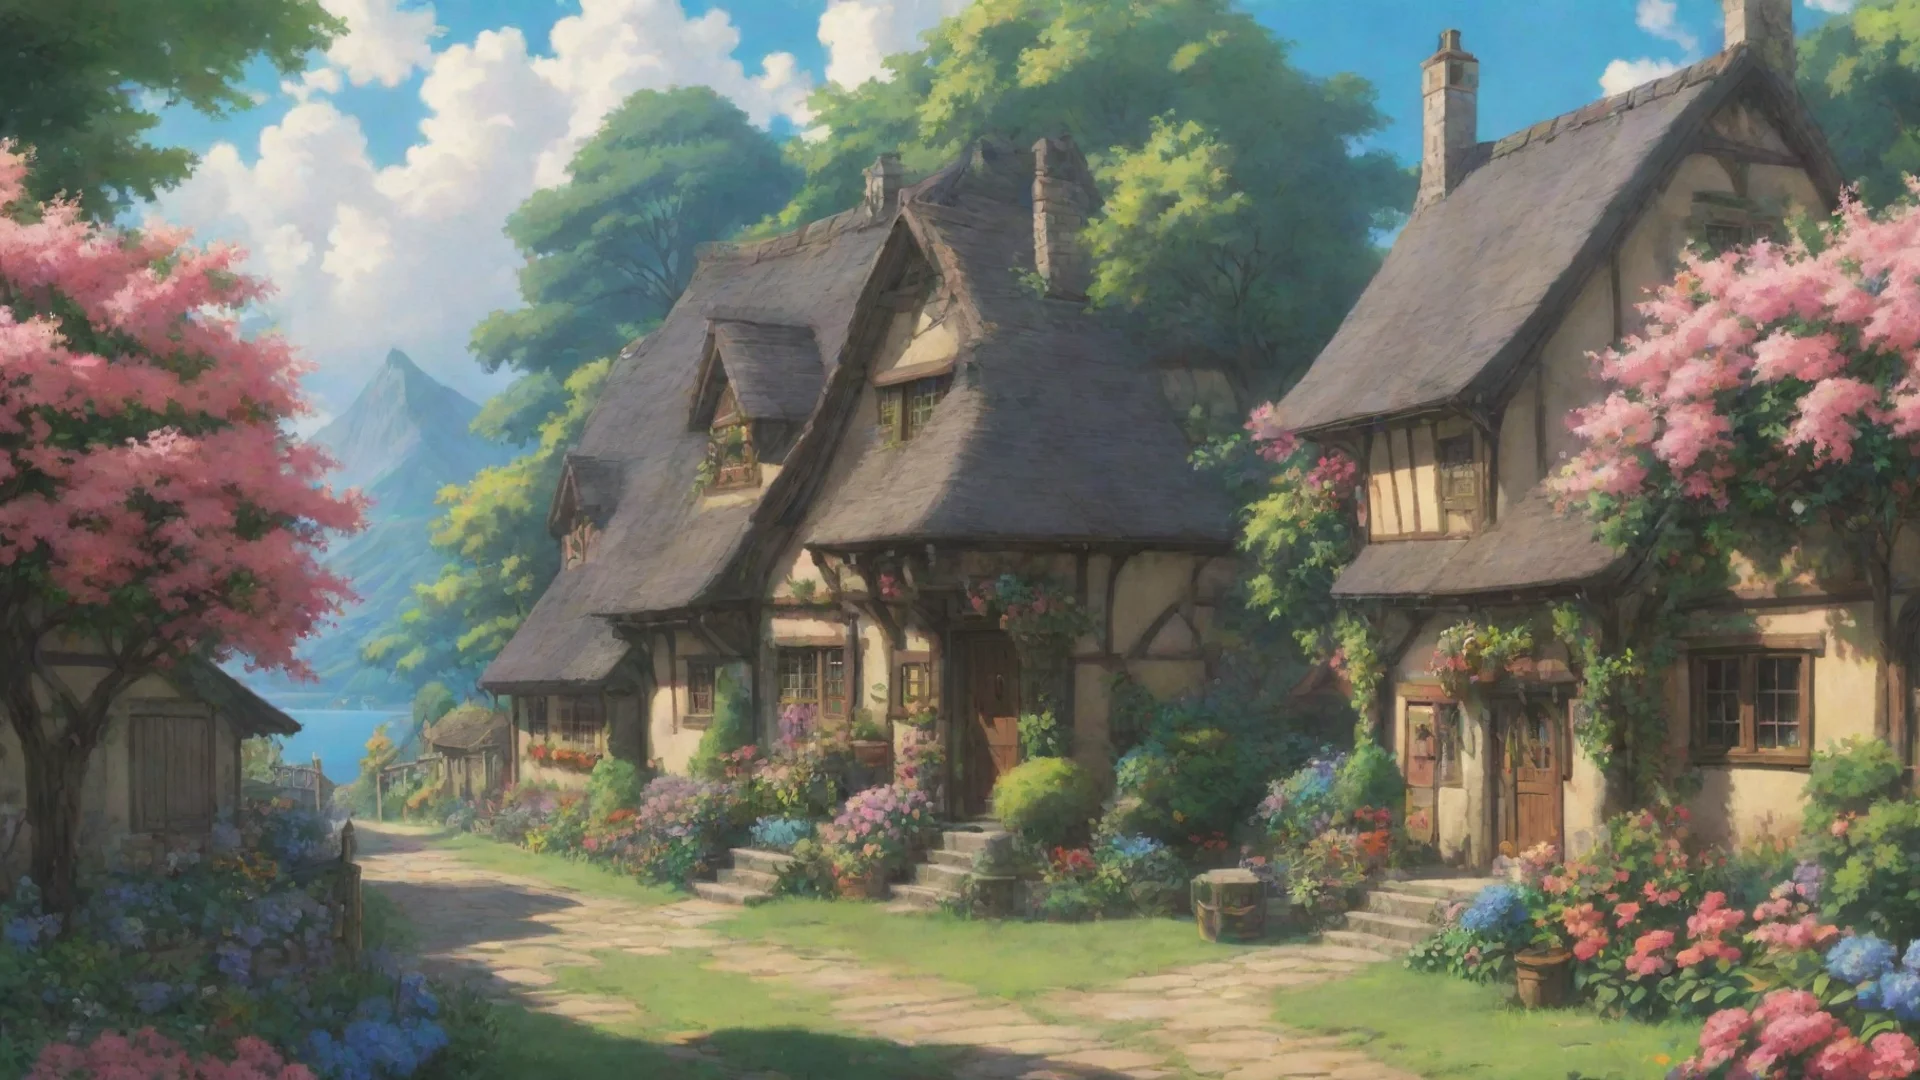 aitrending wonderful ghibli landscape epic anime hd aesthetic town cottages flowers good looking fantastic 1 wide